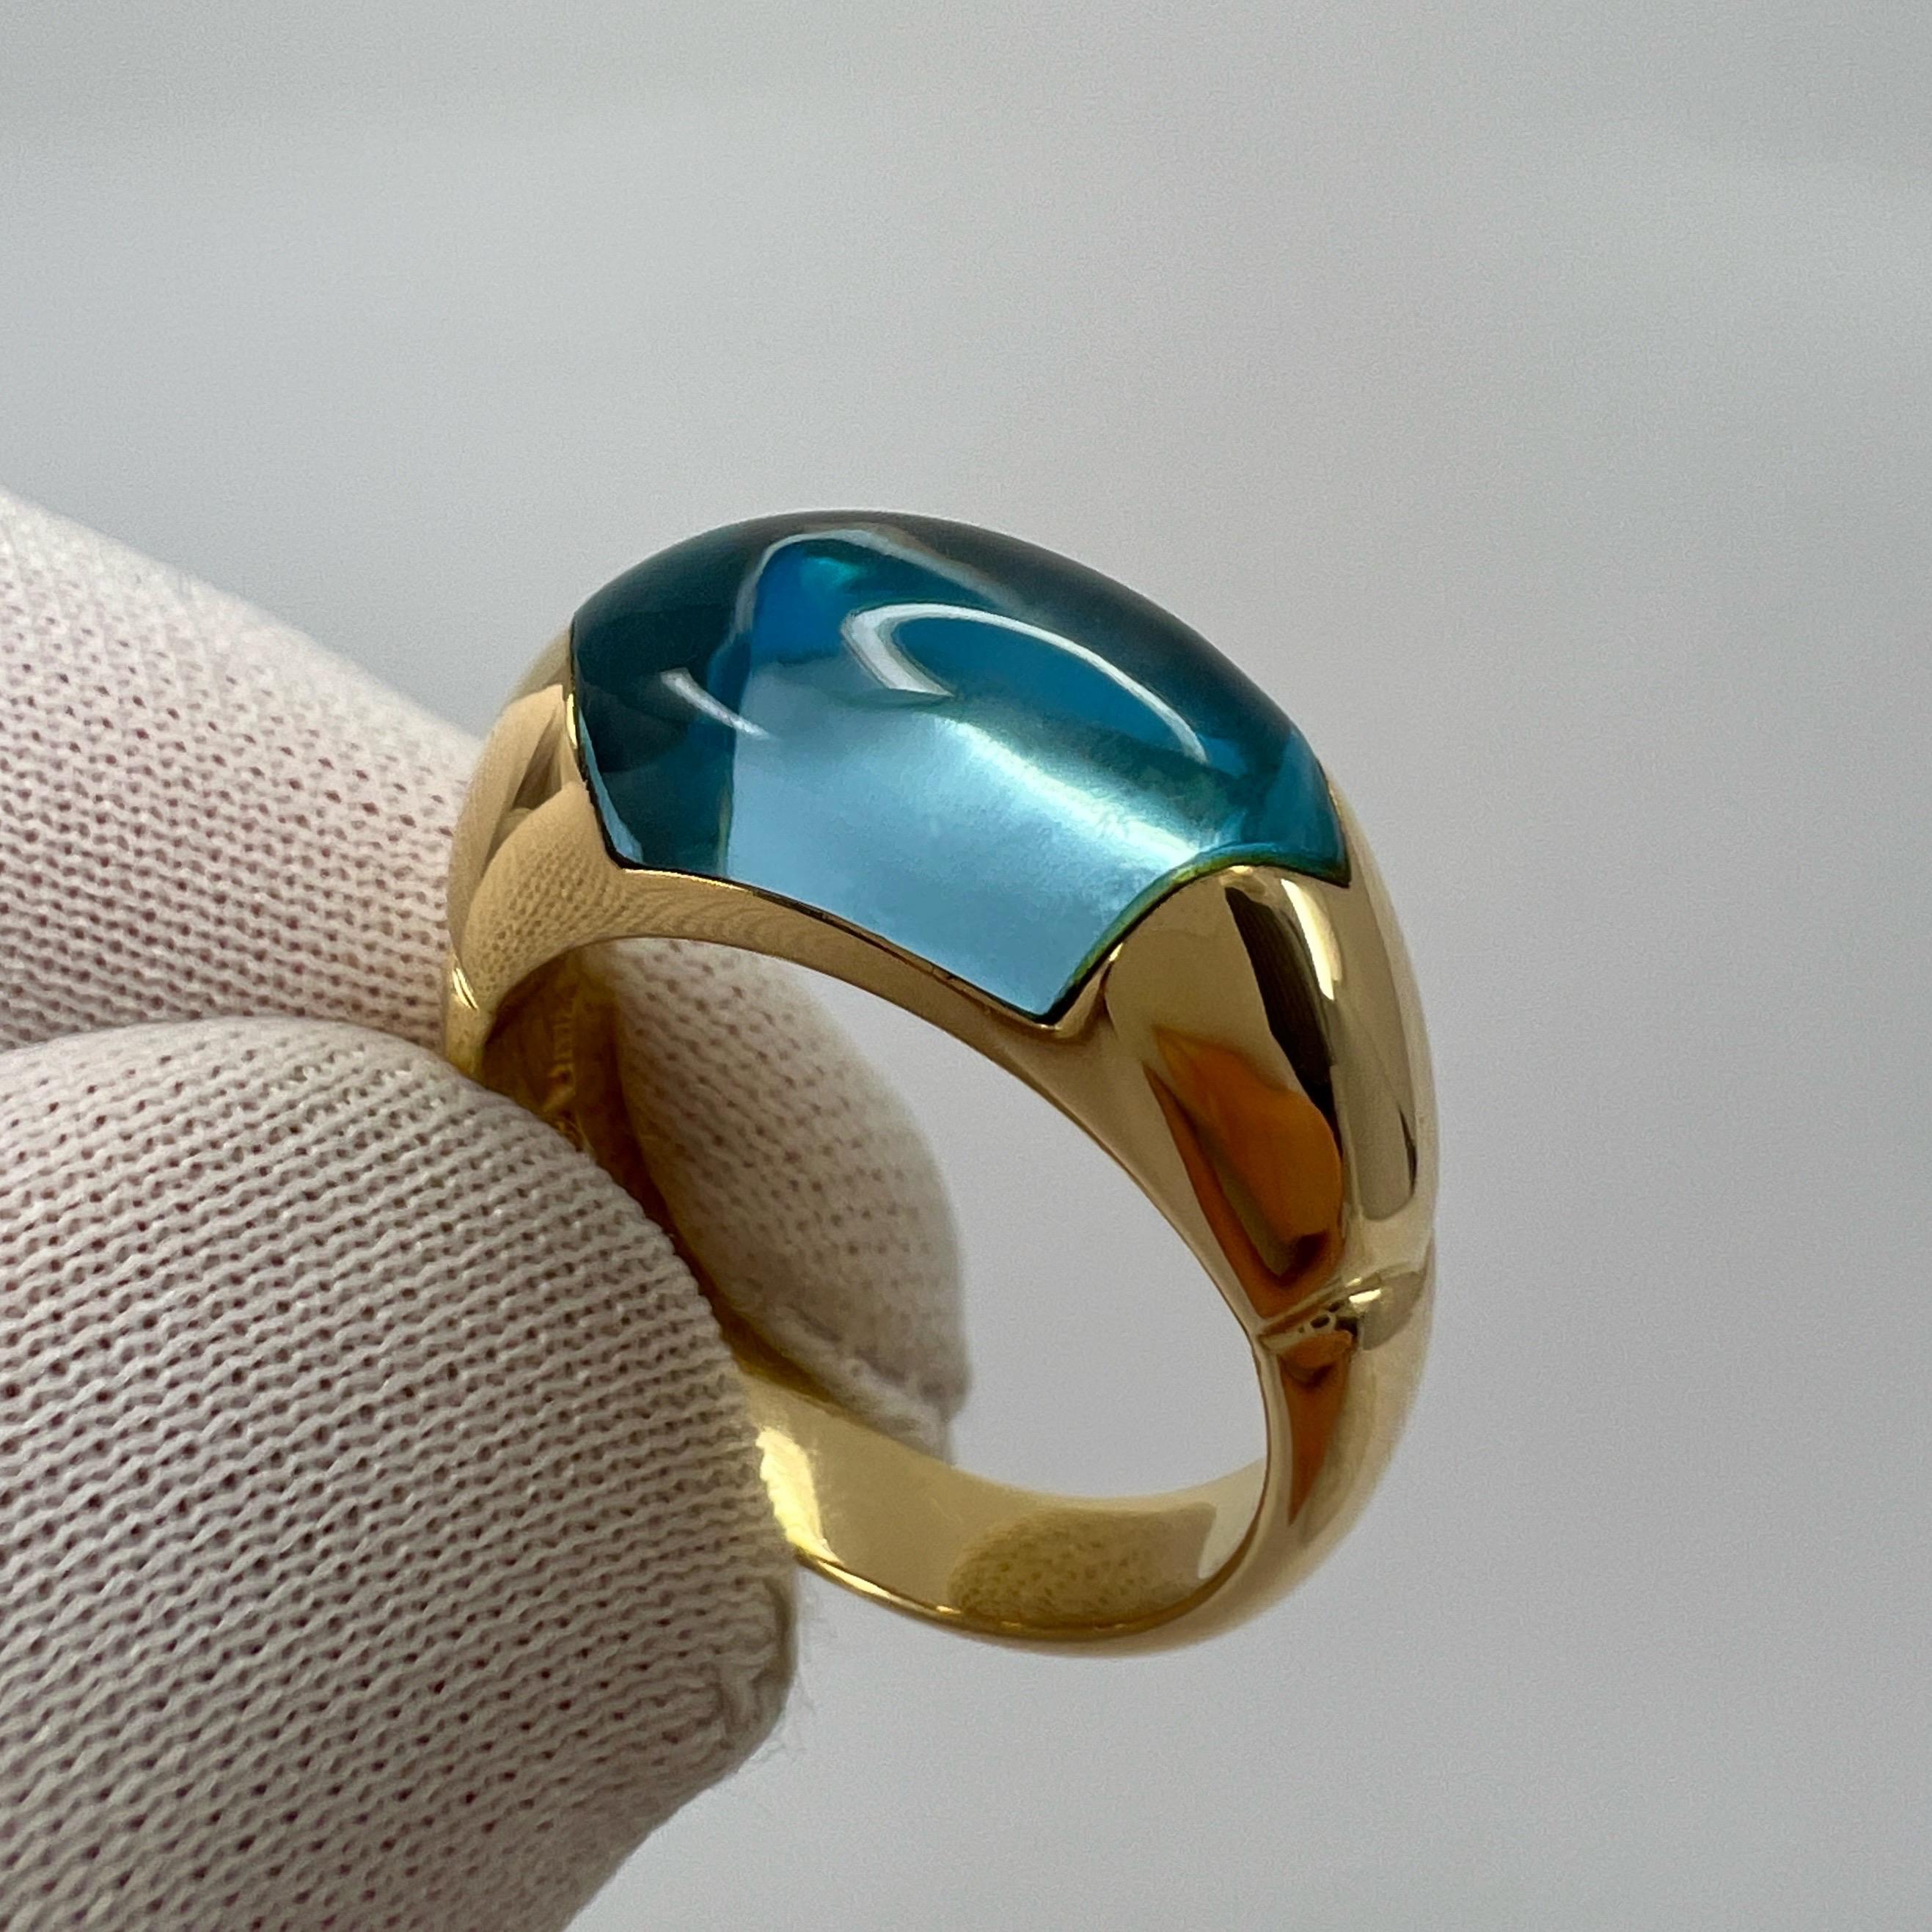 Rare Vintage Bvlgari Certica 18k Yellow Gold Blue Topaz Dome Ring with Box 1